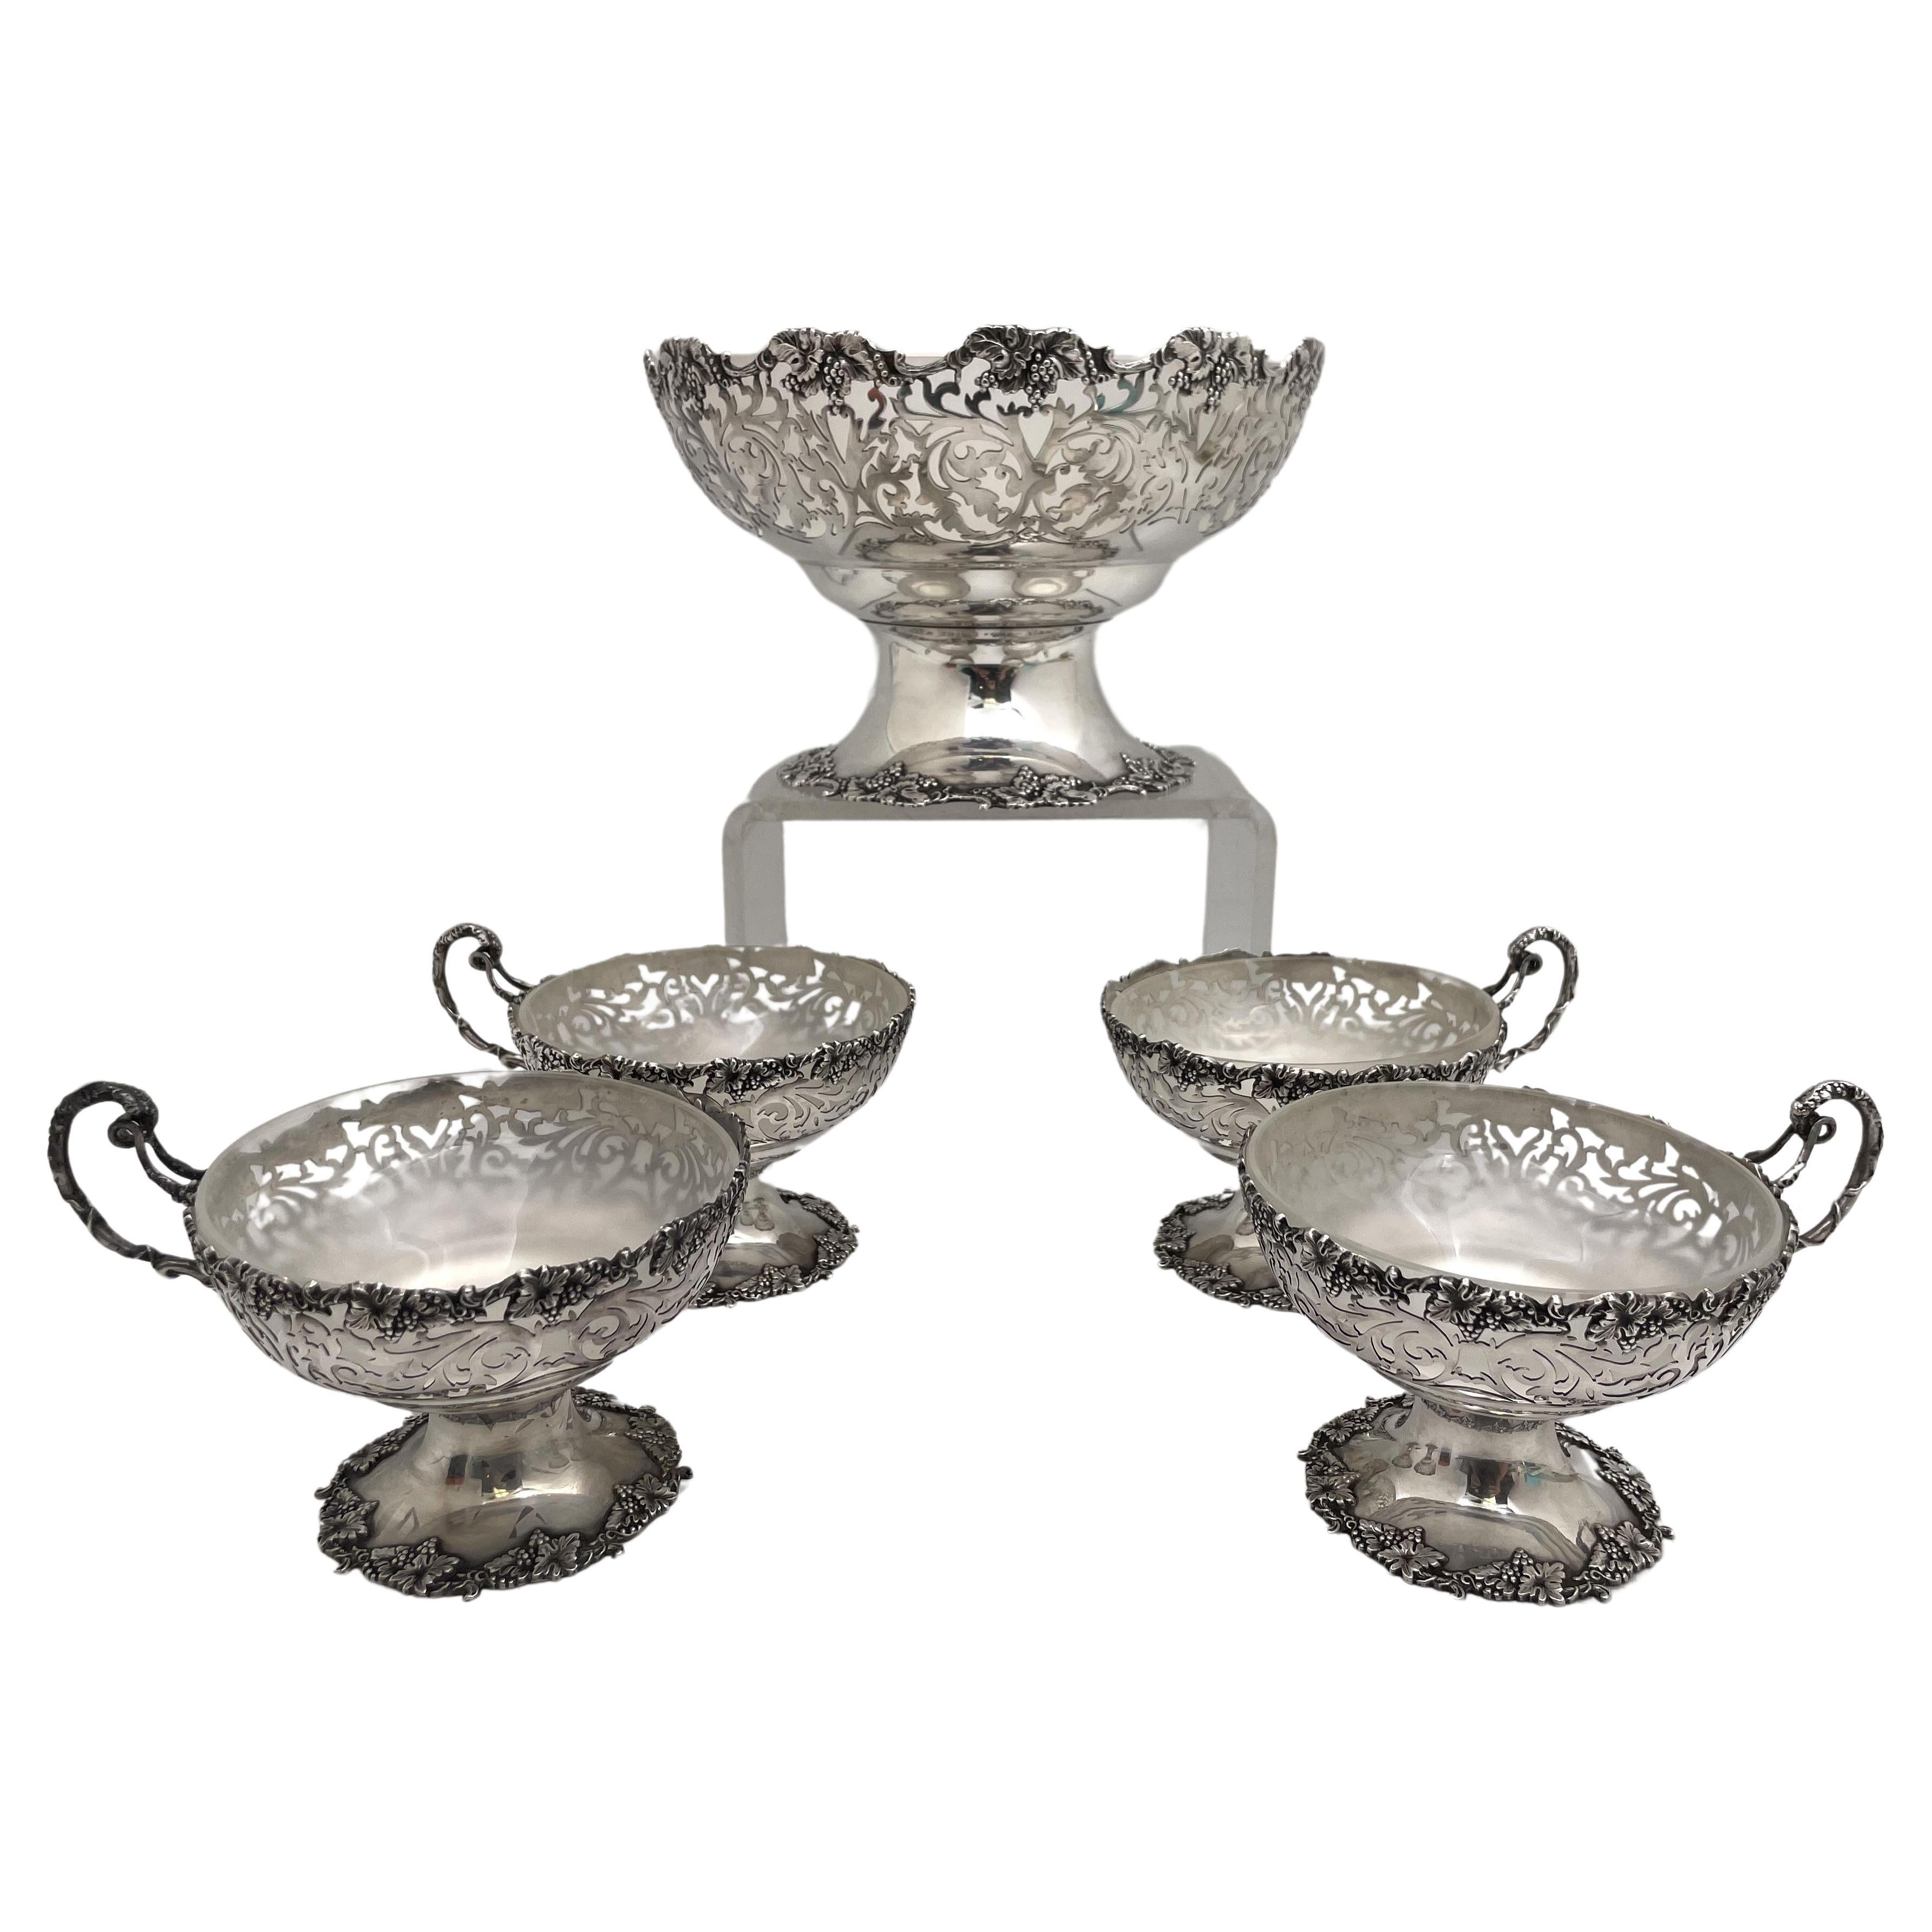 Walker & Hall English Sterling Silver & Glass 1930 Punch Bowl Set with 4 Cups For Sale